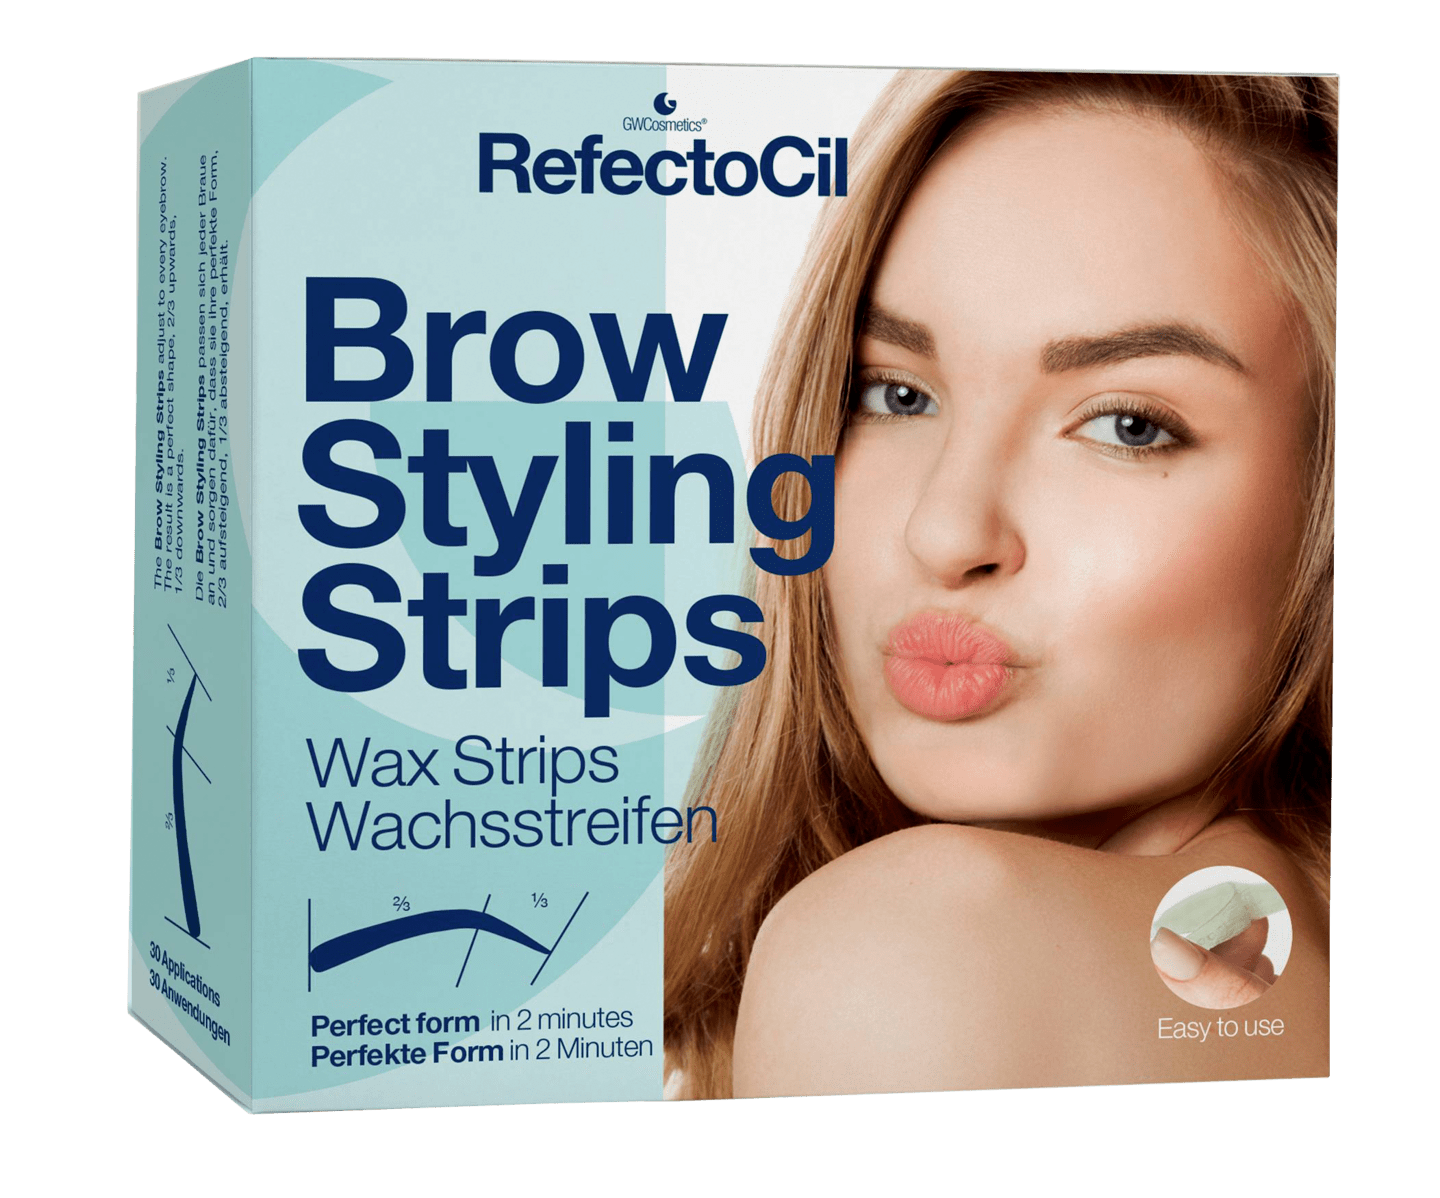 RefectoCil - Brow Styling Strips